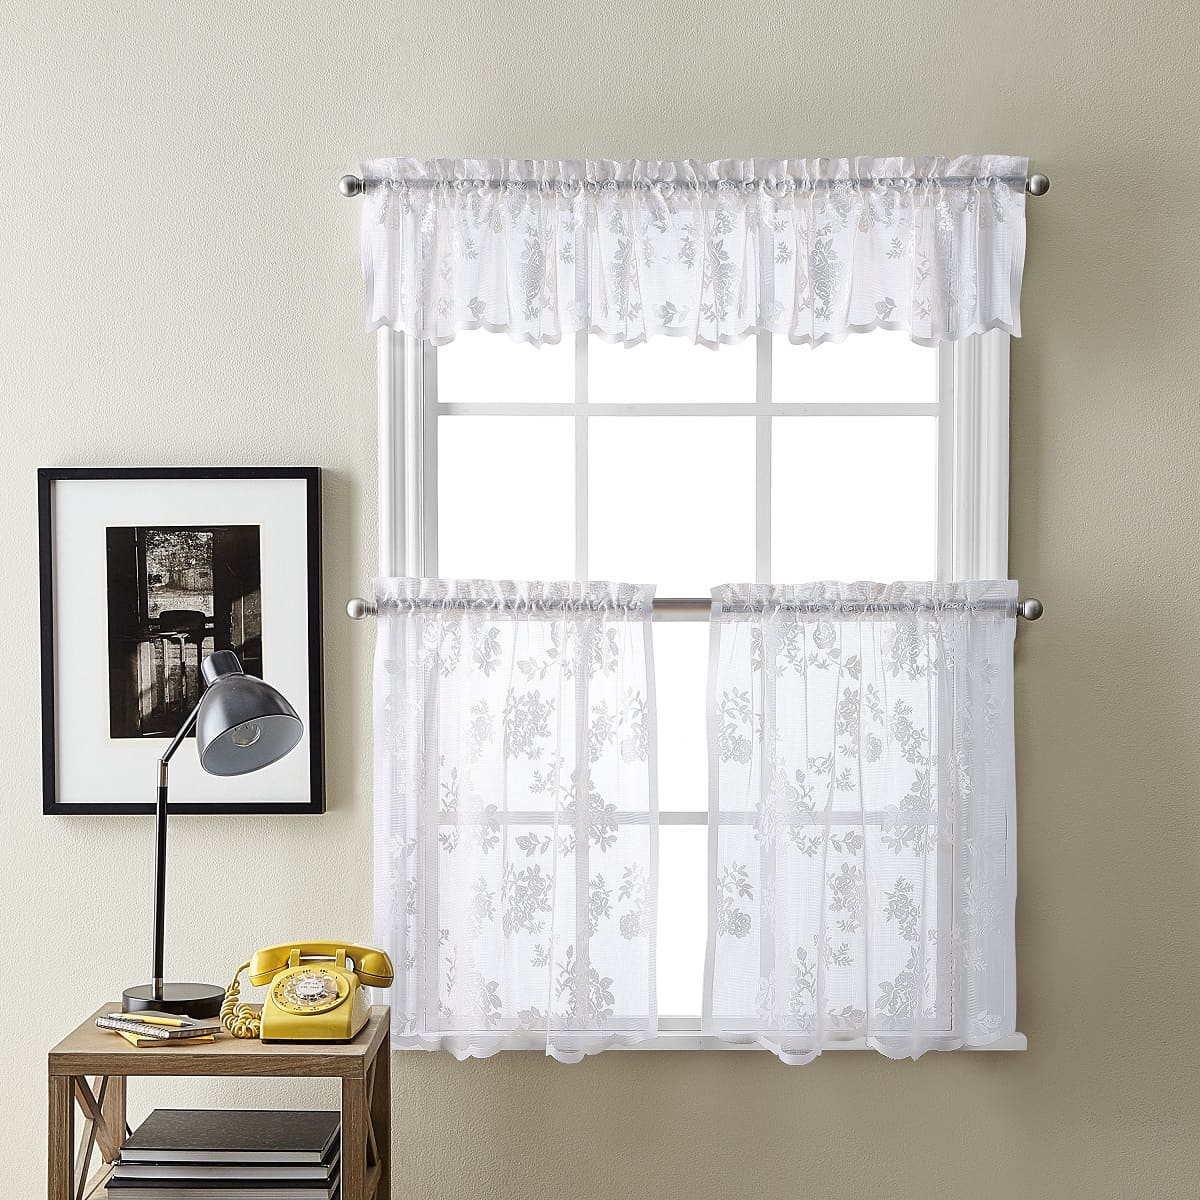 Blossom Lace Swag Valance